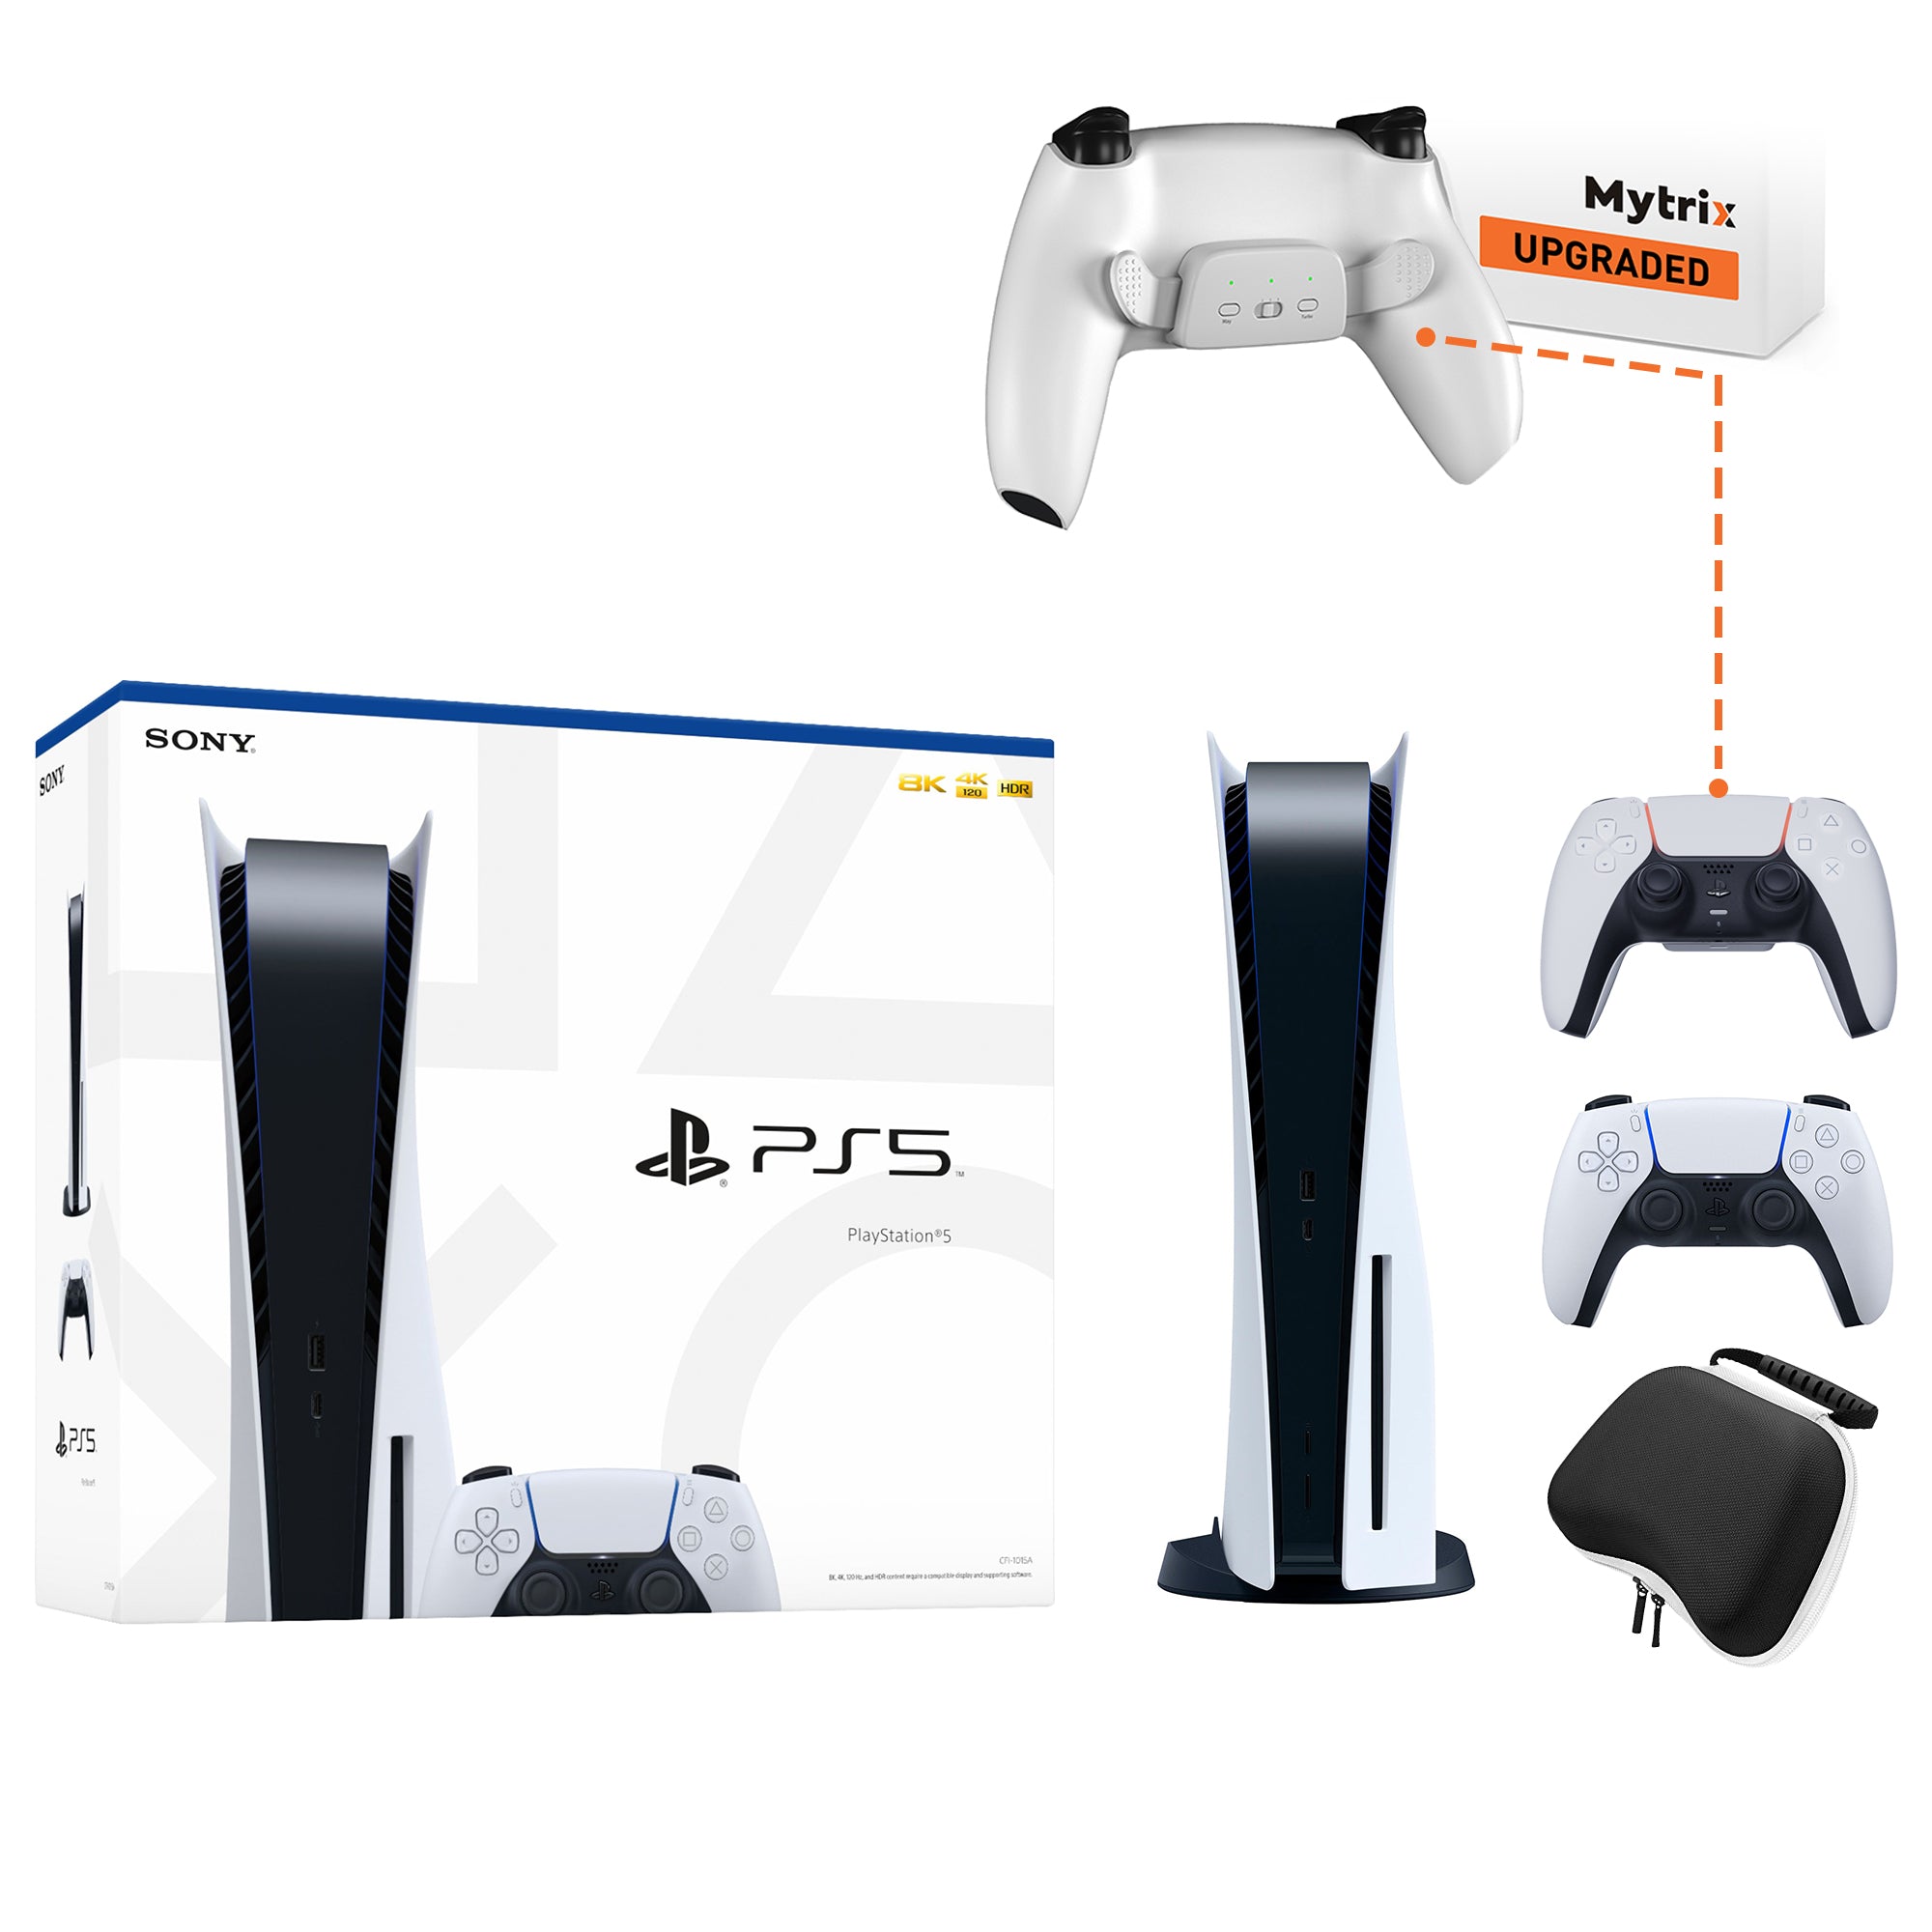 PlayStation 5 Disc Edition Bundle with Additional Mytrix Upgraded PS5 Controller with Remappable Back Paddles and Turbo Function, and Hard Shell Protective Controller Case - PS5 Console